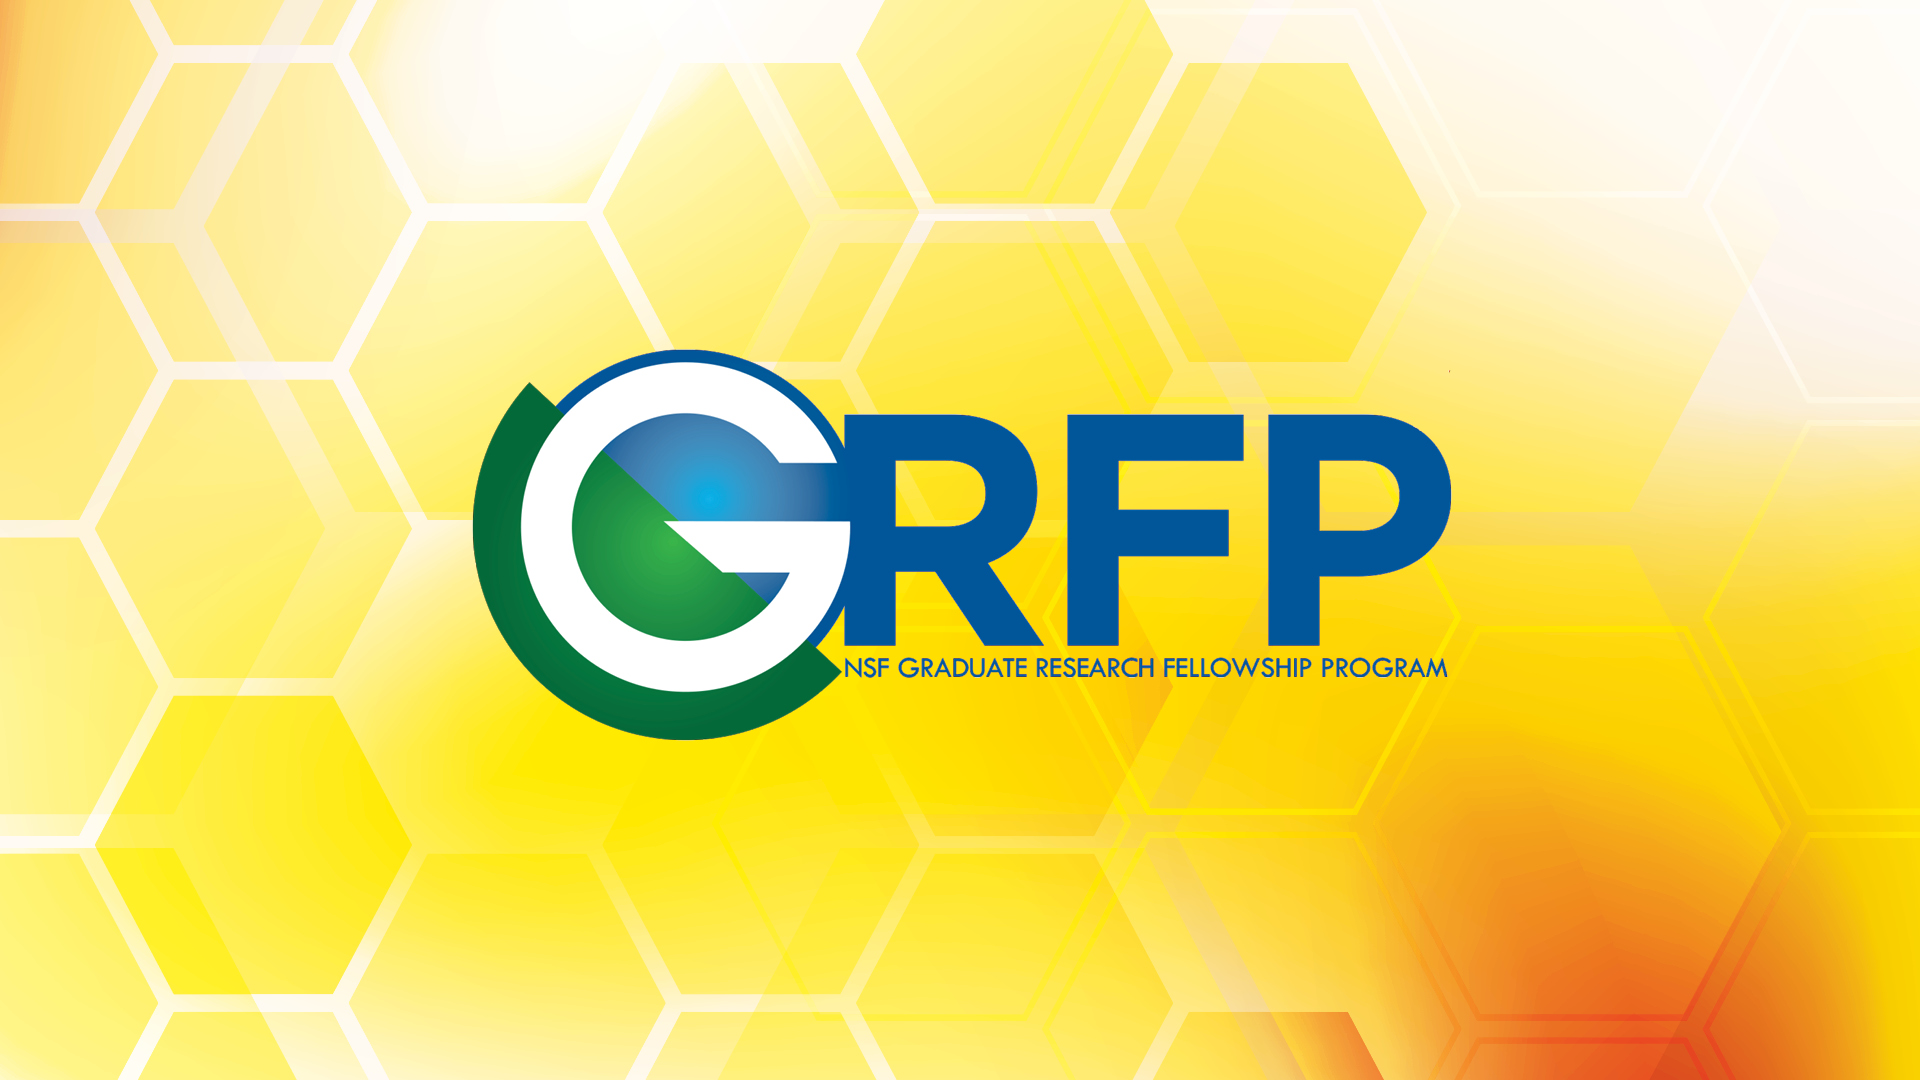 Graphic featuring the logo of the National Science Foundation Graduate Research Fellowship Program.